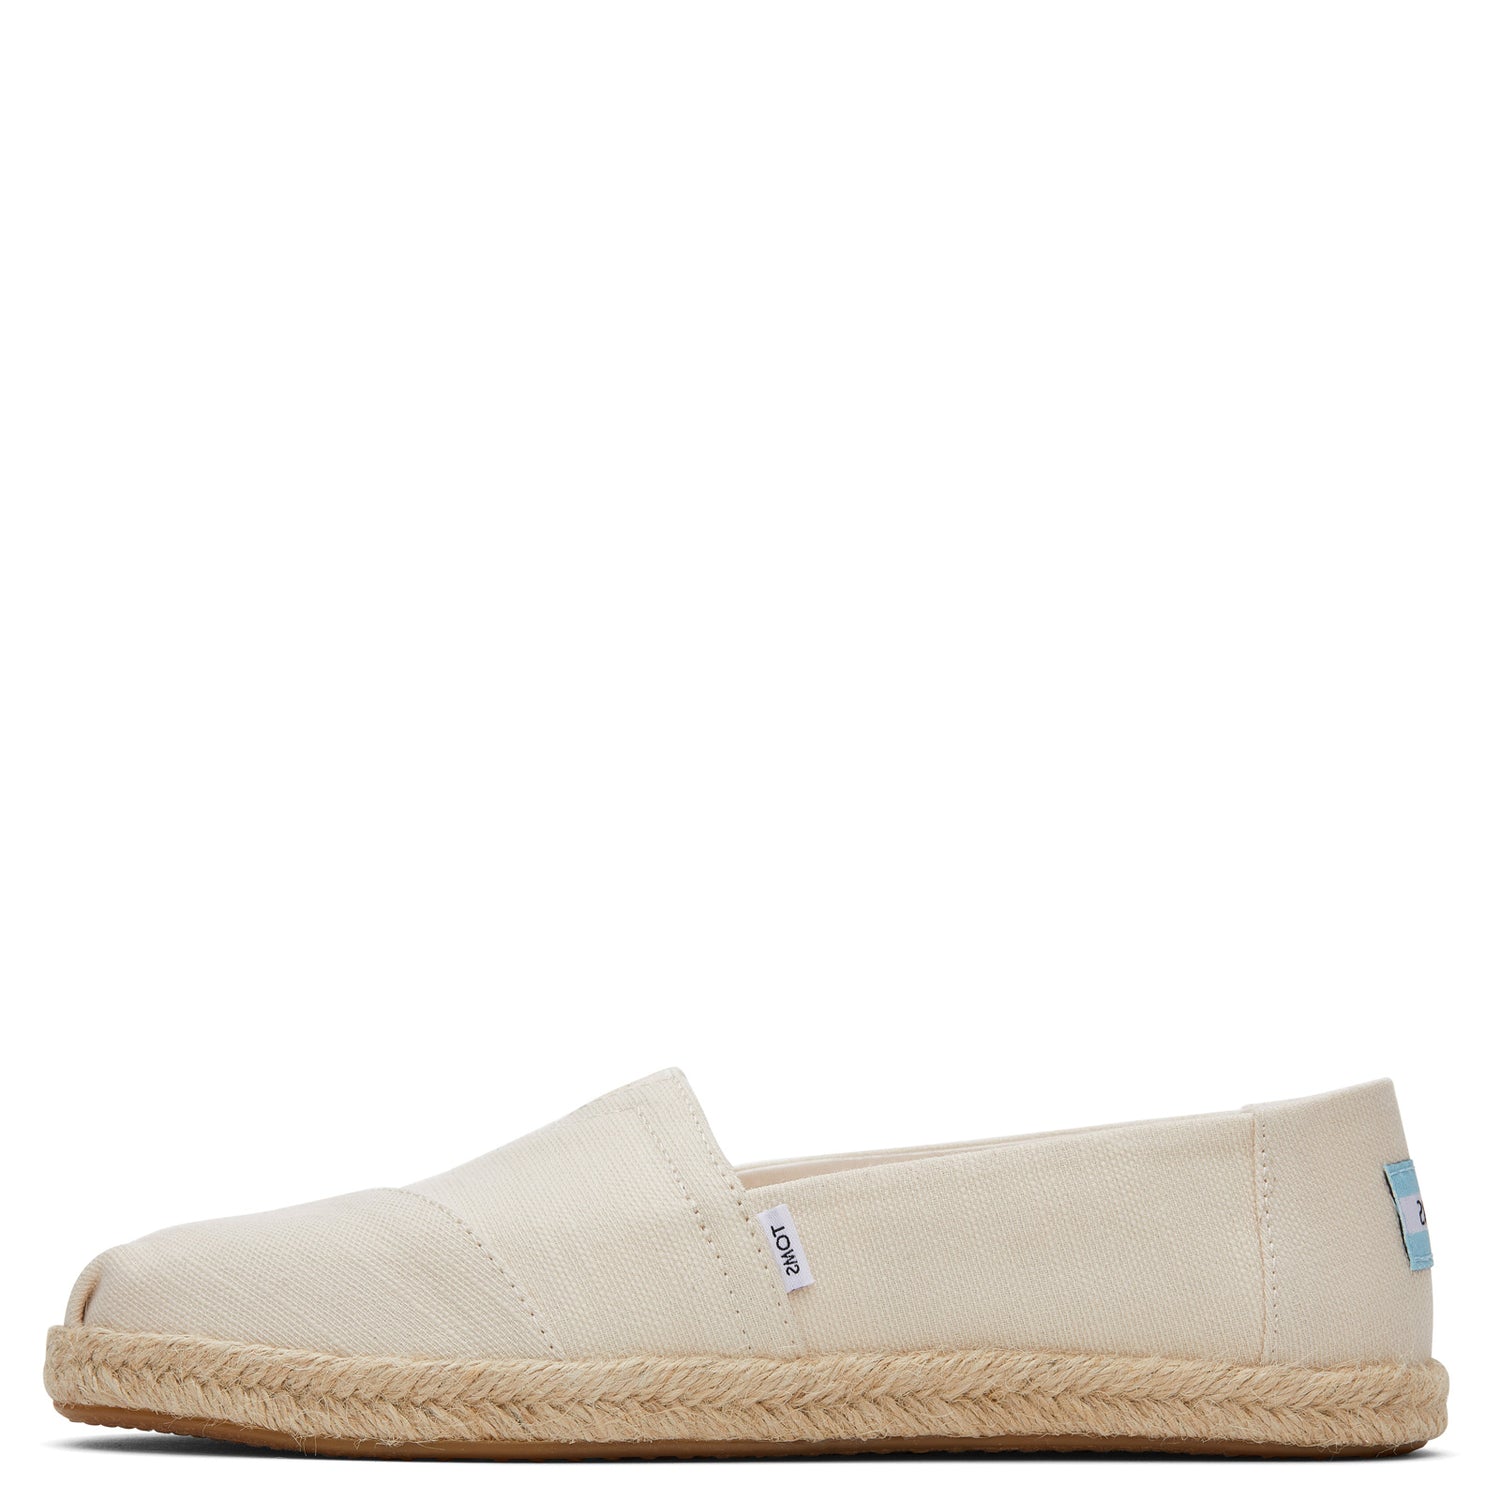 Peltz Shoes  Women's Toms Alpargata Rope Recycled Espadrille Slip-On NATURAL 10019682